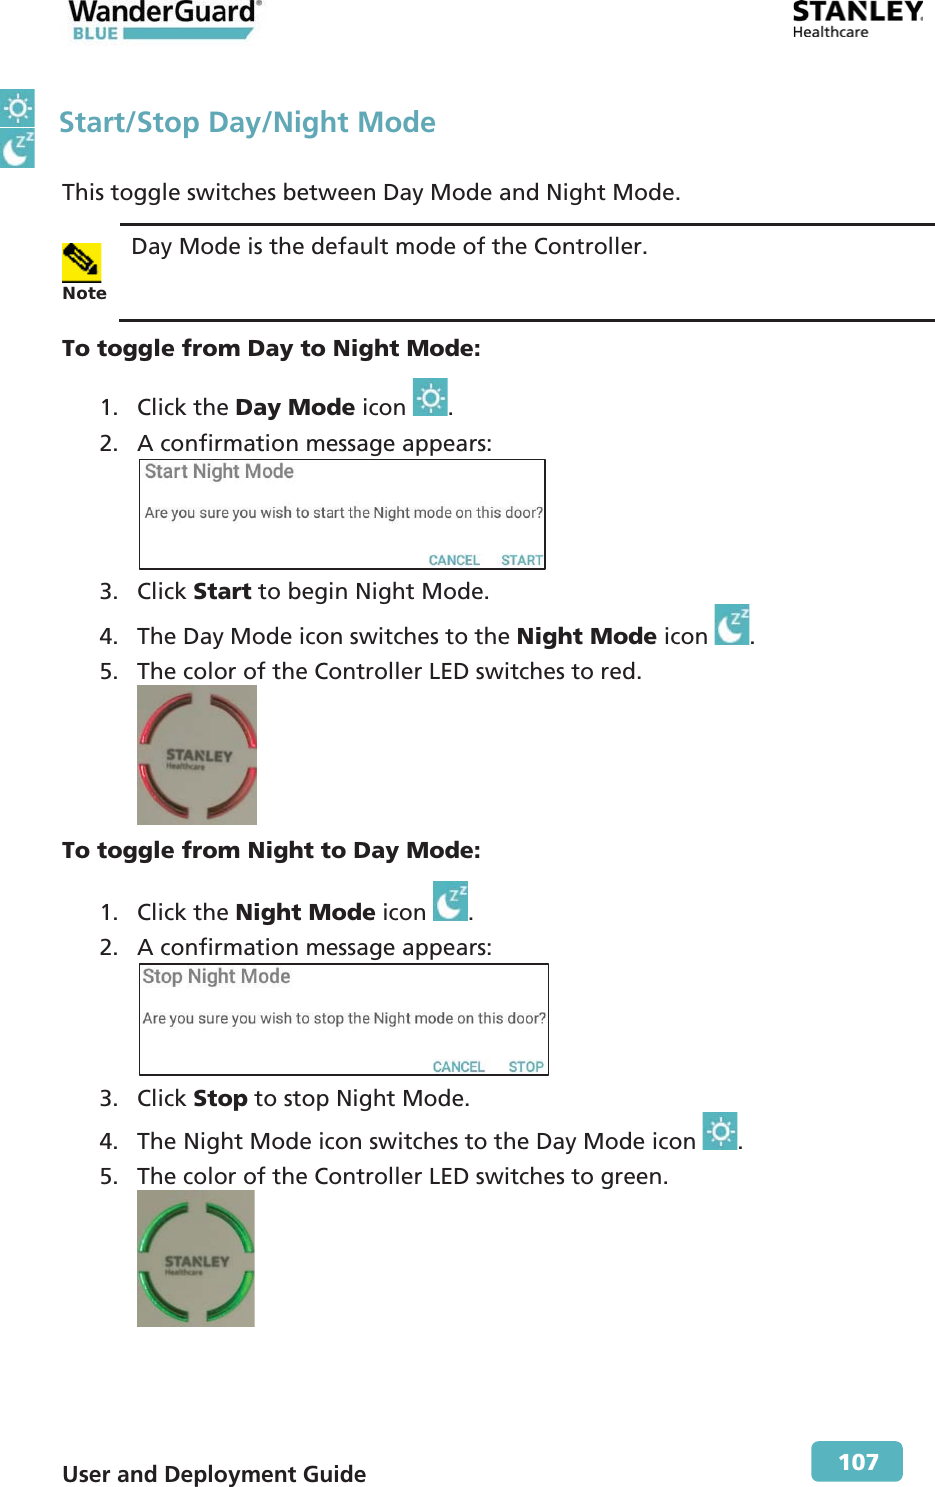  User and Deployment Guide        107   Start/Stop Day/Night Mode This toggle switches between Day Mode and Night Mode.  Note Day Mode is the default mode of the Controller. To toggle from Day to Night Mode: 1. Click the Day Mode icon  . 2. A confirmation message appears:  3. Click Start to begin Night Mode. 4. The Day Mode icon switches to the Night Mode icon  . 5. The color of the Controller LED switches to red.  To toggle from Night to Day Mode: 1. Click the Night Mode icon  . 2. A confirmation message appears:  3. Click Stop to stop Night Mode. 4. The Night Mode icon switches to the Day Mode icon  . 5. The color of the Controller LED switches to green.  